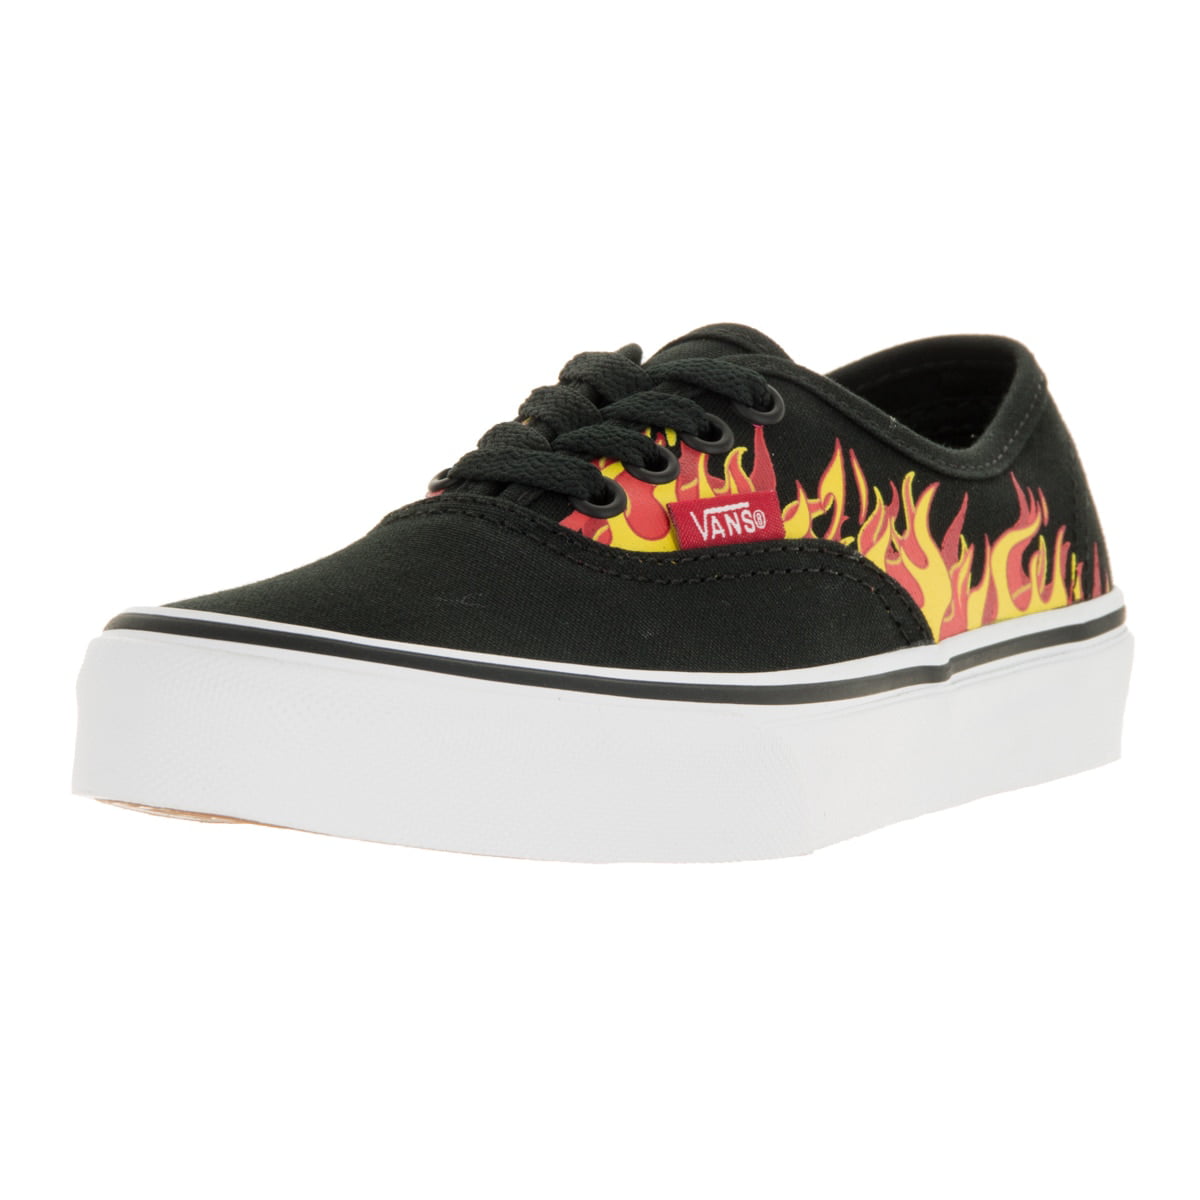 Vans Kids' Authentic Flame Black and Racing Red Canvas Skate Shoes ...